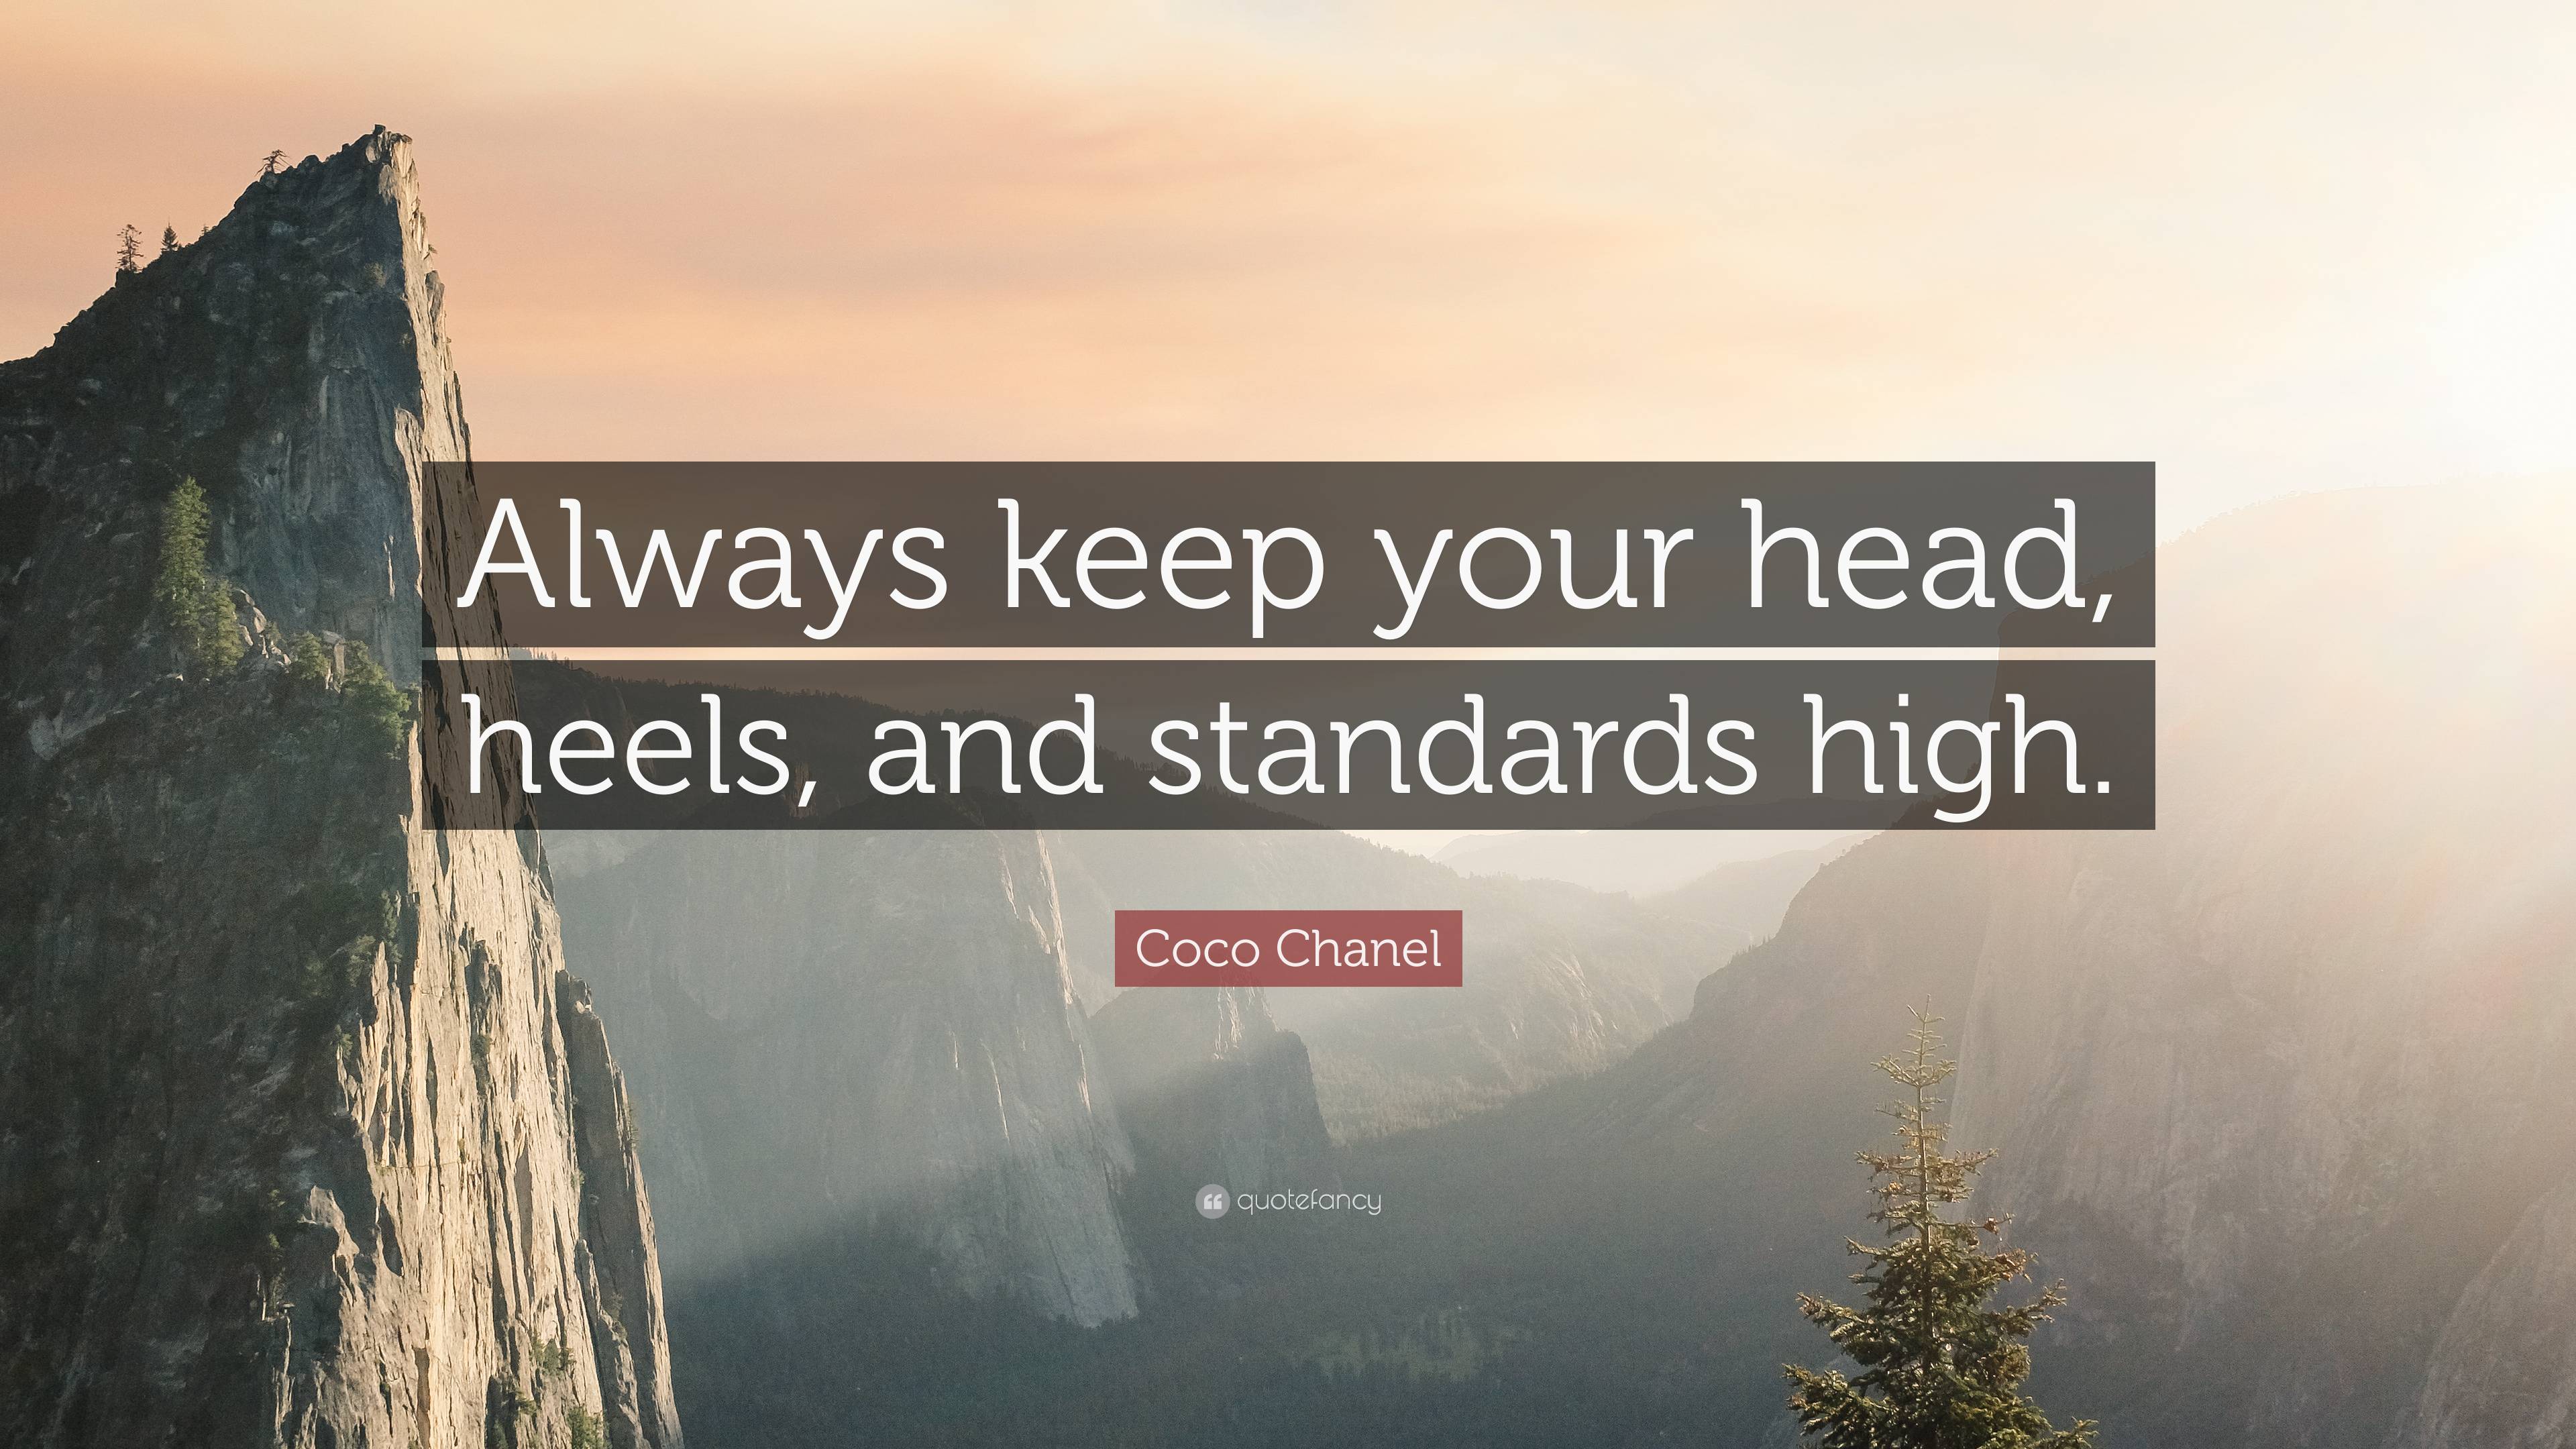 keep your heels, head, and standards high quotes - Google Search | Coco  chanel, Levensmotto, Citaten